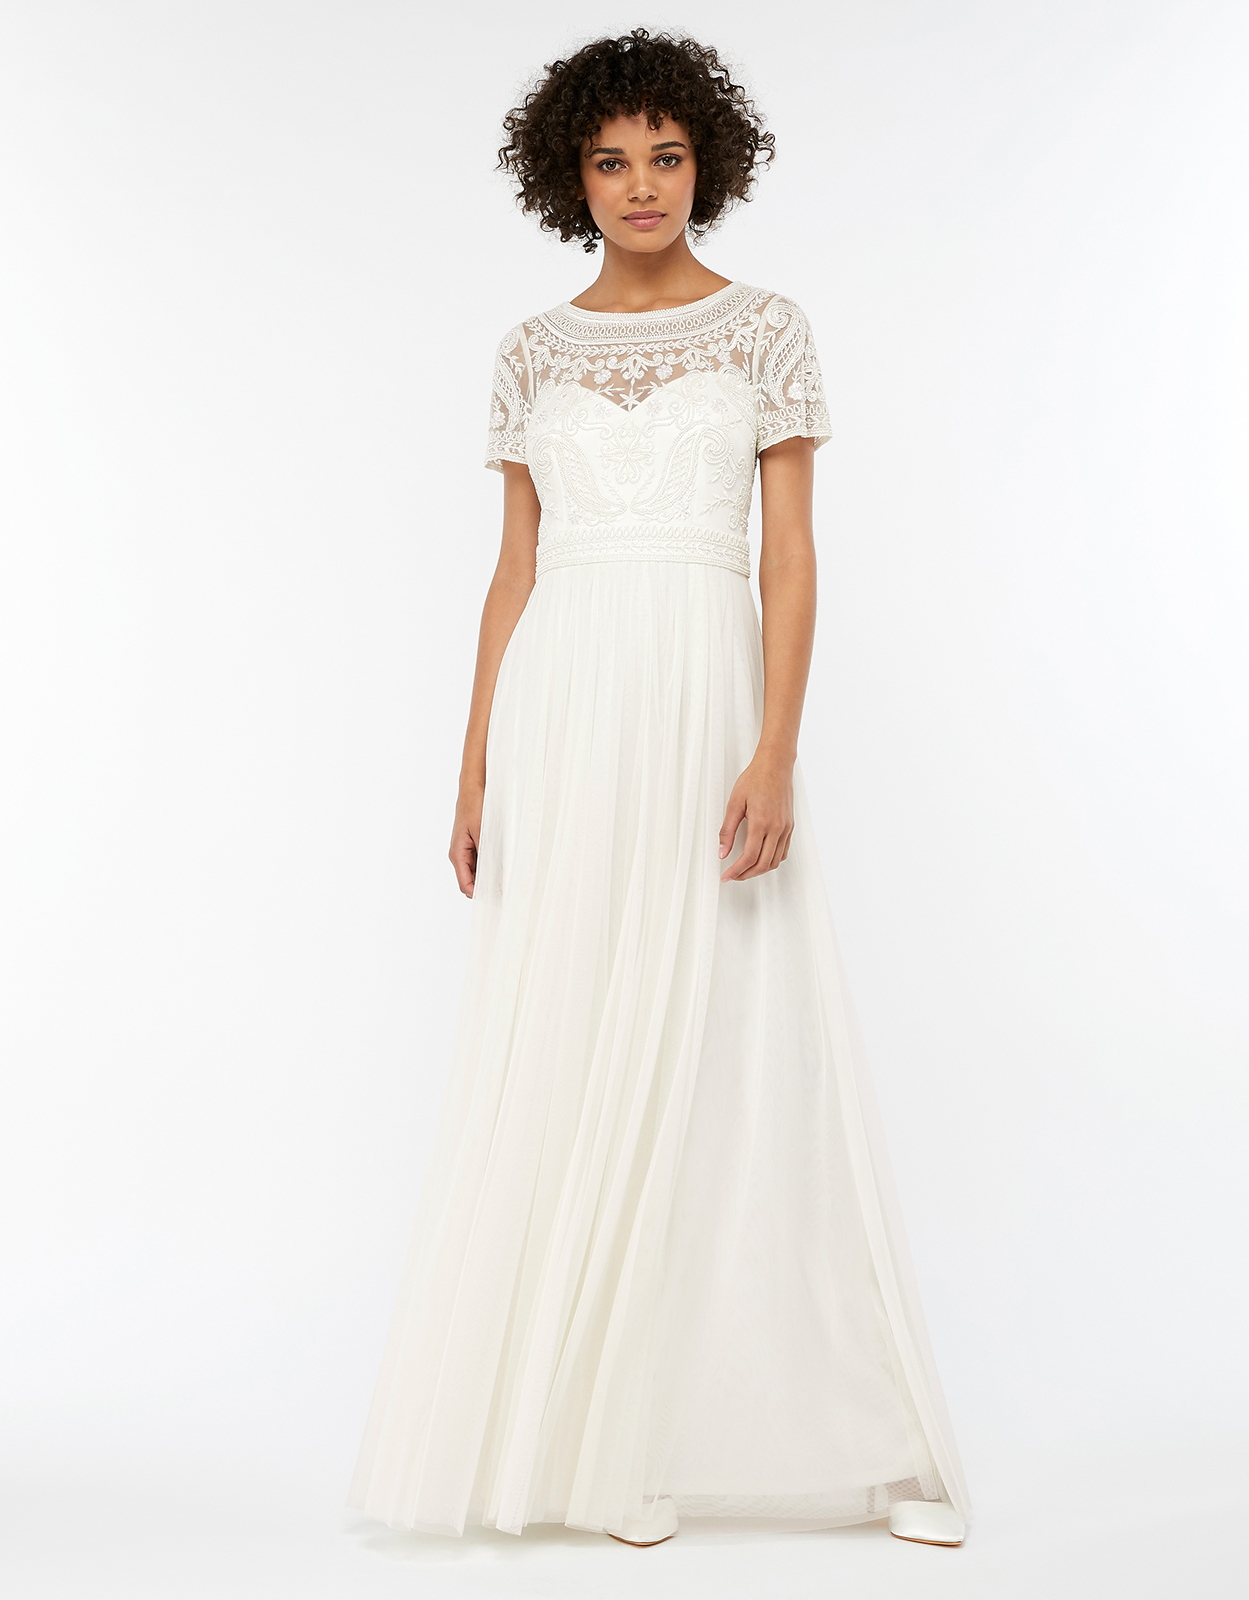 Classic Wedding Gowns For the Over-50 ...